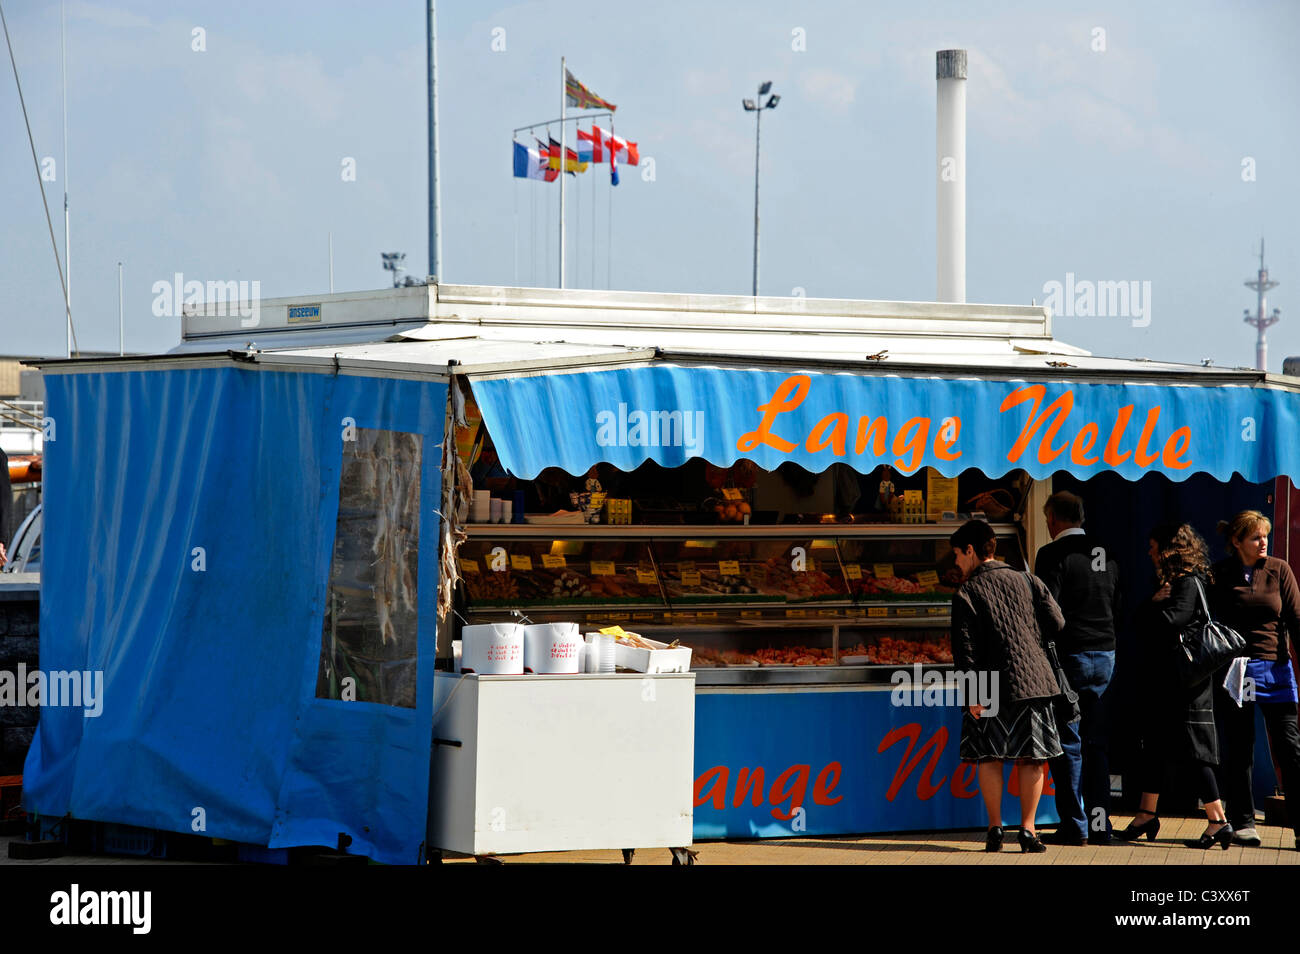 Seafood and fish seller quay Visserskaai,Ostend,Belgium,Lange Nelle stand Stock Photo